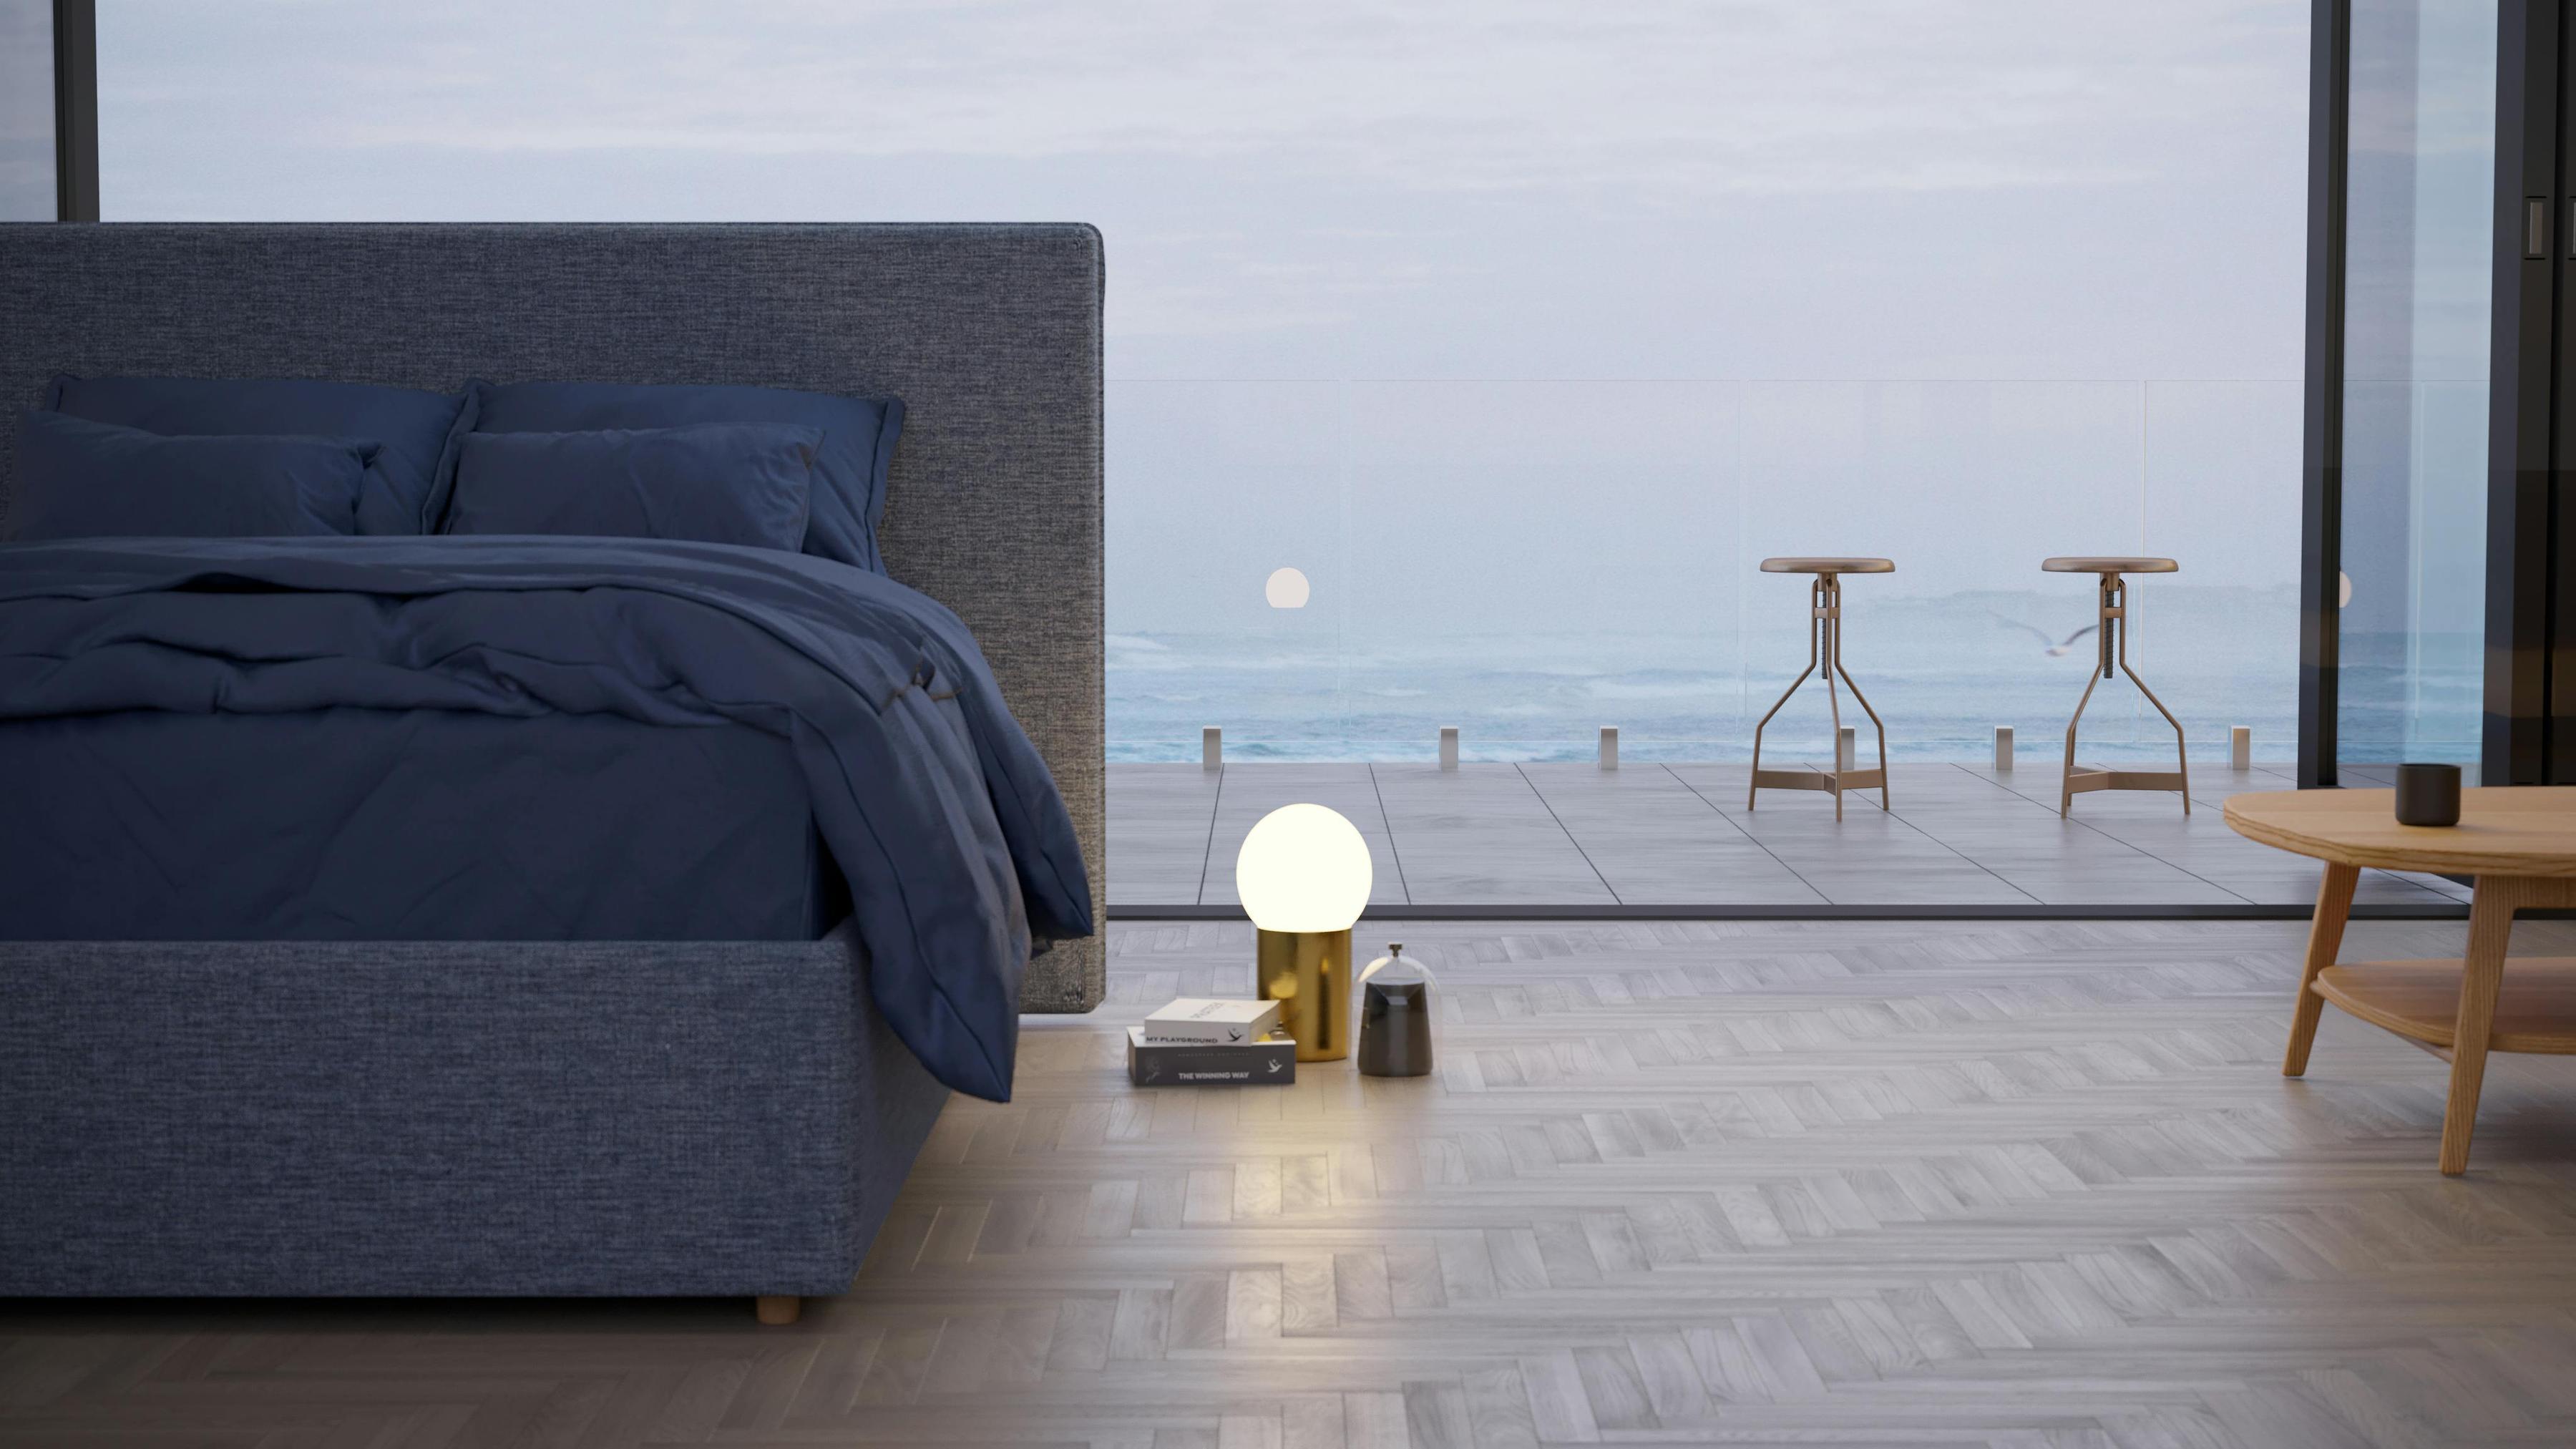 The Seaspray SD Indestruct Bed in Washed Navy, in a minimalist bedroom overlooking the ocean as the sun rises.